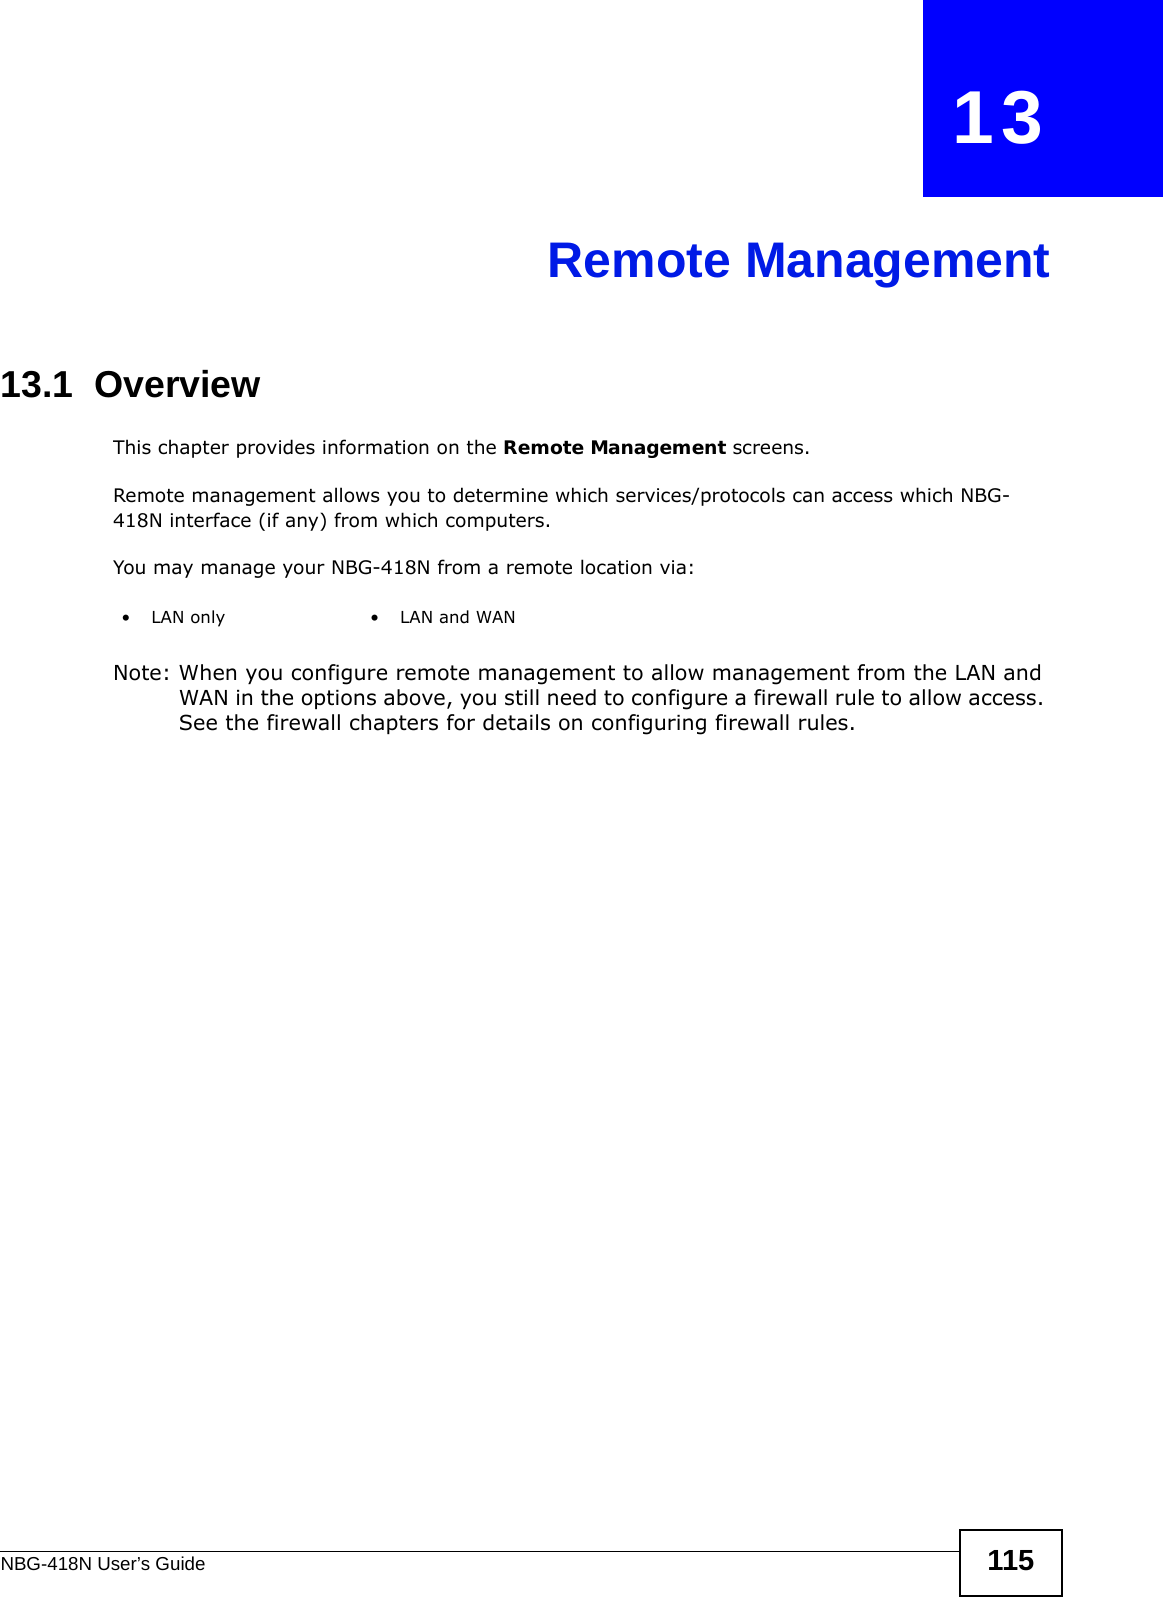 NBG-418N User’s Guide 115CHAPTER   13Remote Management13.1  OverviewThis chapter provides information on the Remote Management screens. Remote management allows you to determine which services/protocols can access which NBG-418N interface (if any) from which computers.You may manage your NBG-418N from a remote location via:Note: When you configure remote management to allow management from the LAN and WAN in the options above, you still need to configure a firewall rule to allow access. See the firewall chapters for details on configuring firewall rules.•LAN only •LAN and WAN